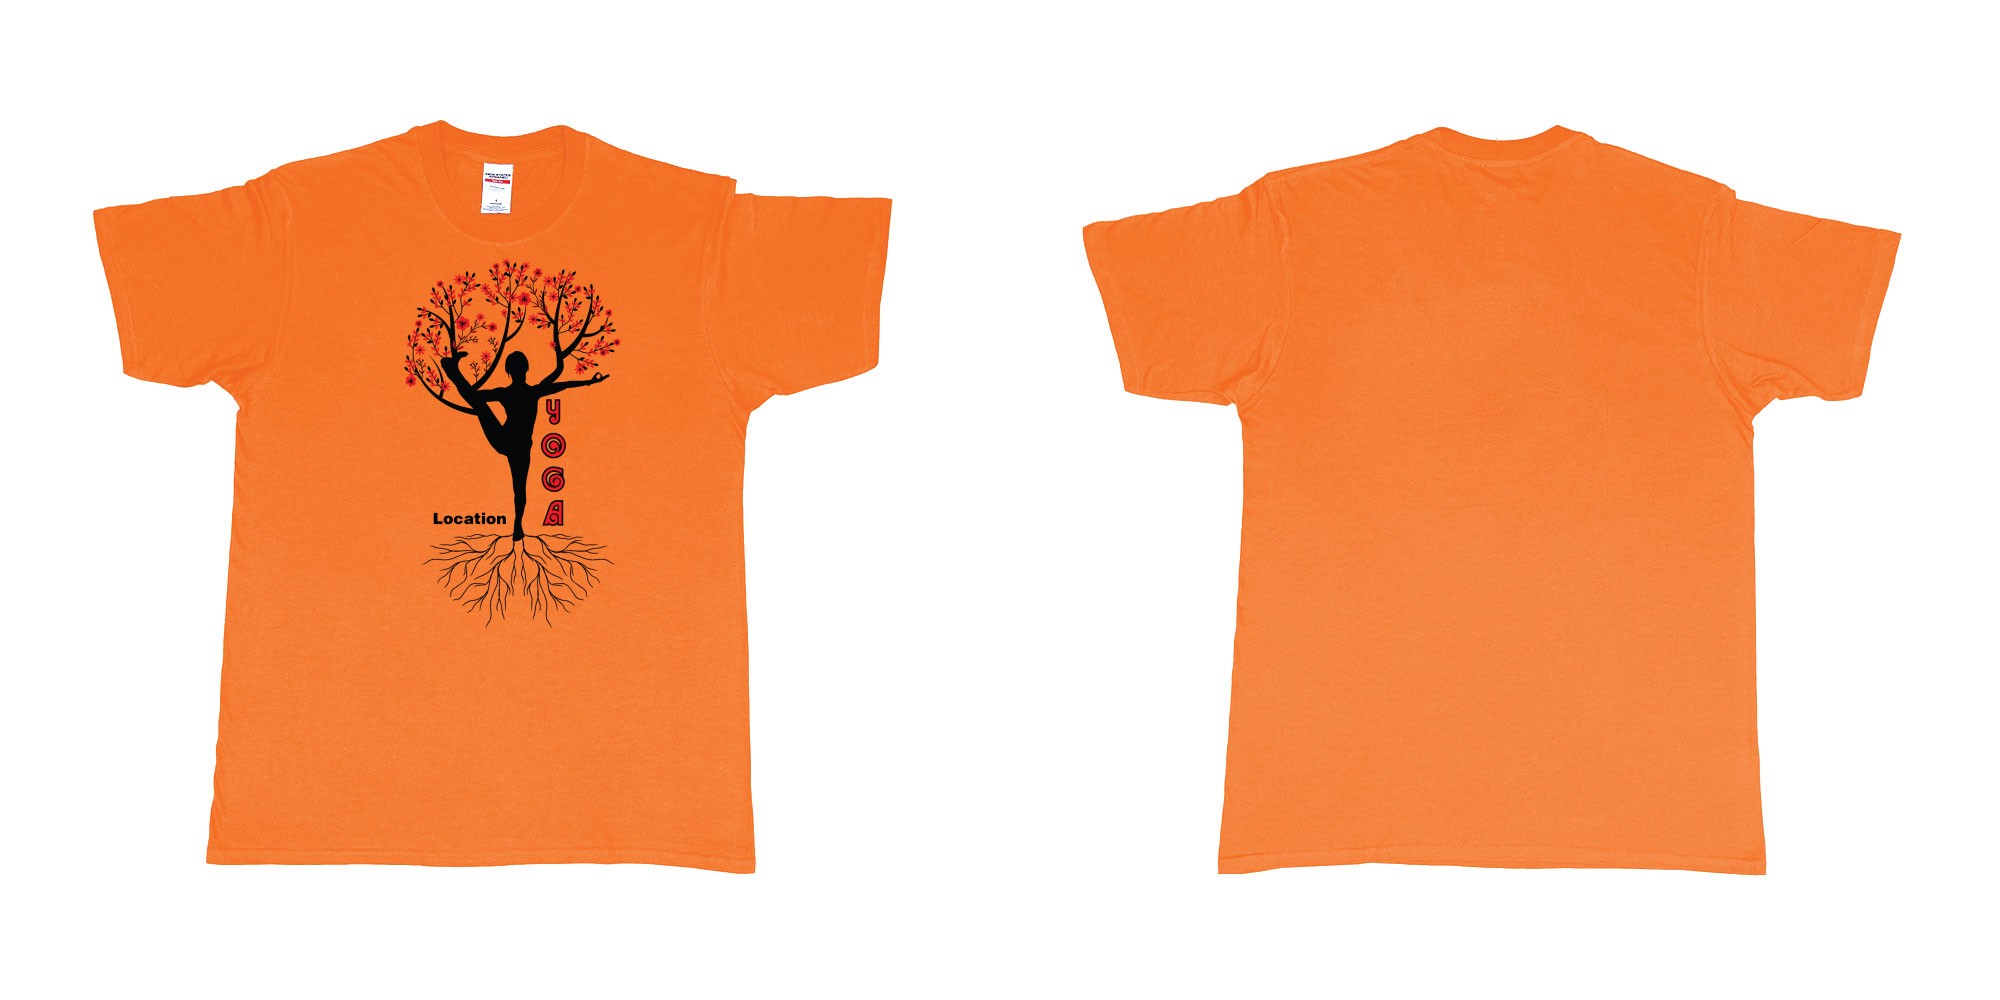 Custom tshirt design yoga tree of life is blooming own logo location design in fabric color orange choice your own text made in Bali by The Pirate Way